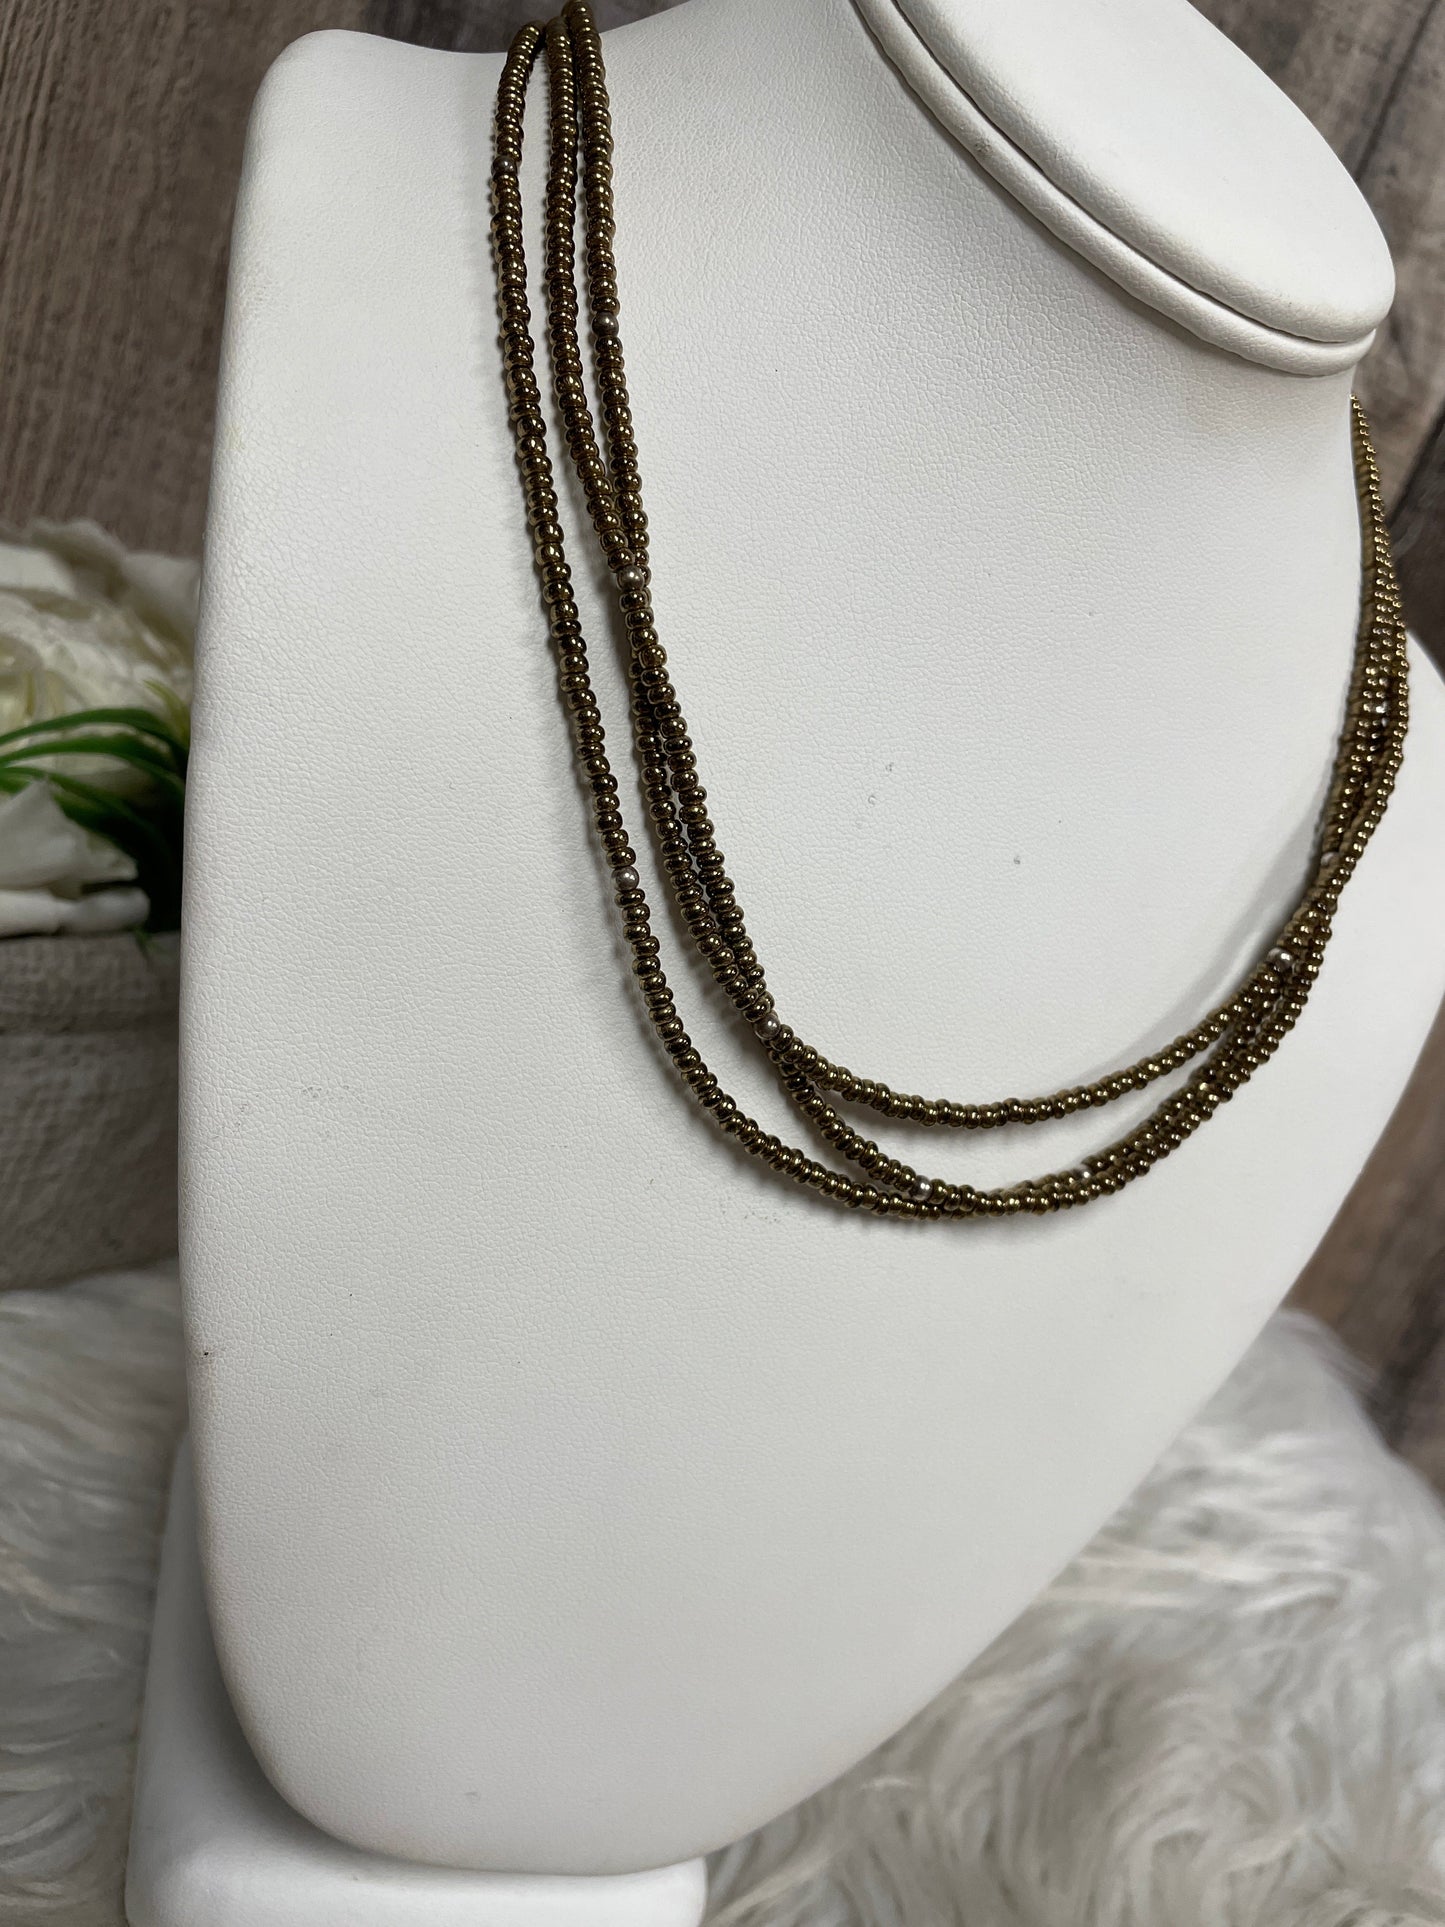 Necklace Layered By Silpada